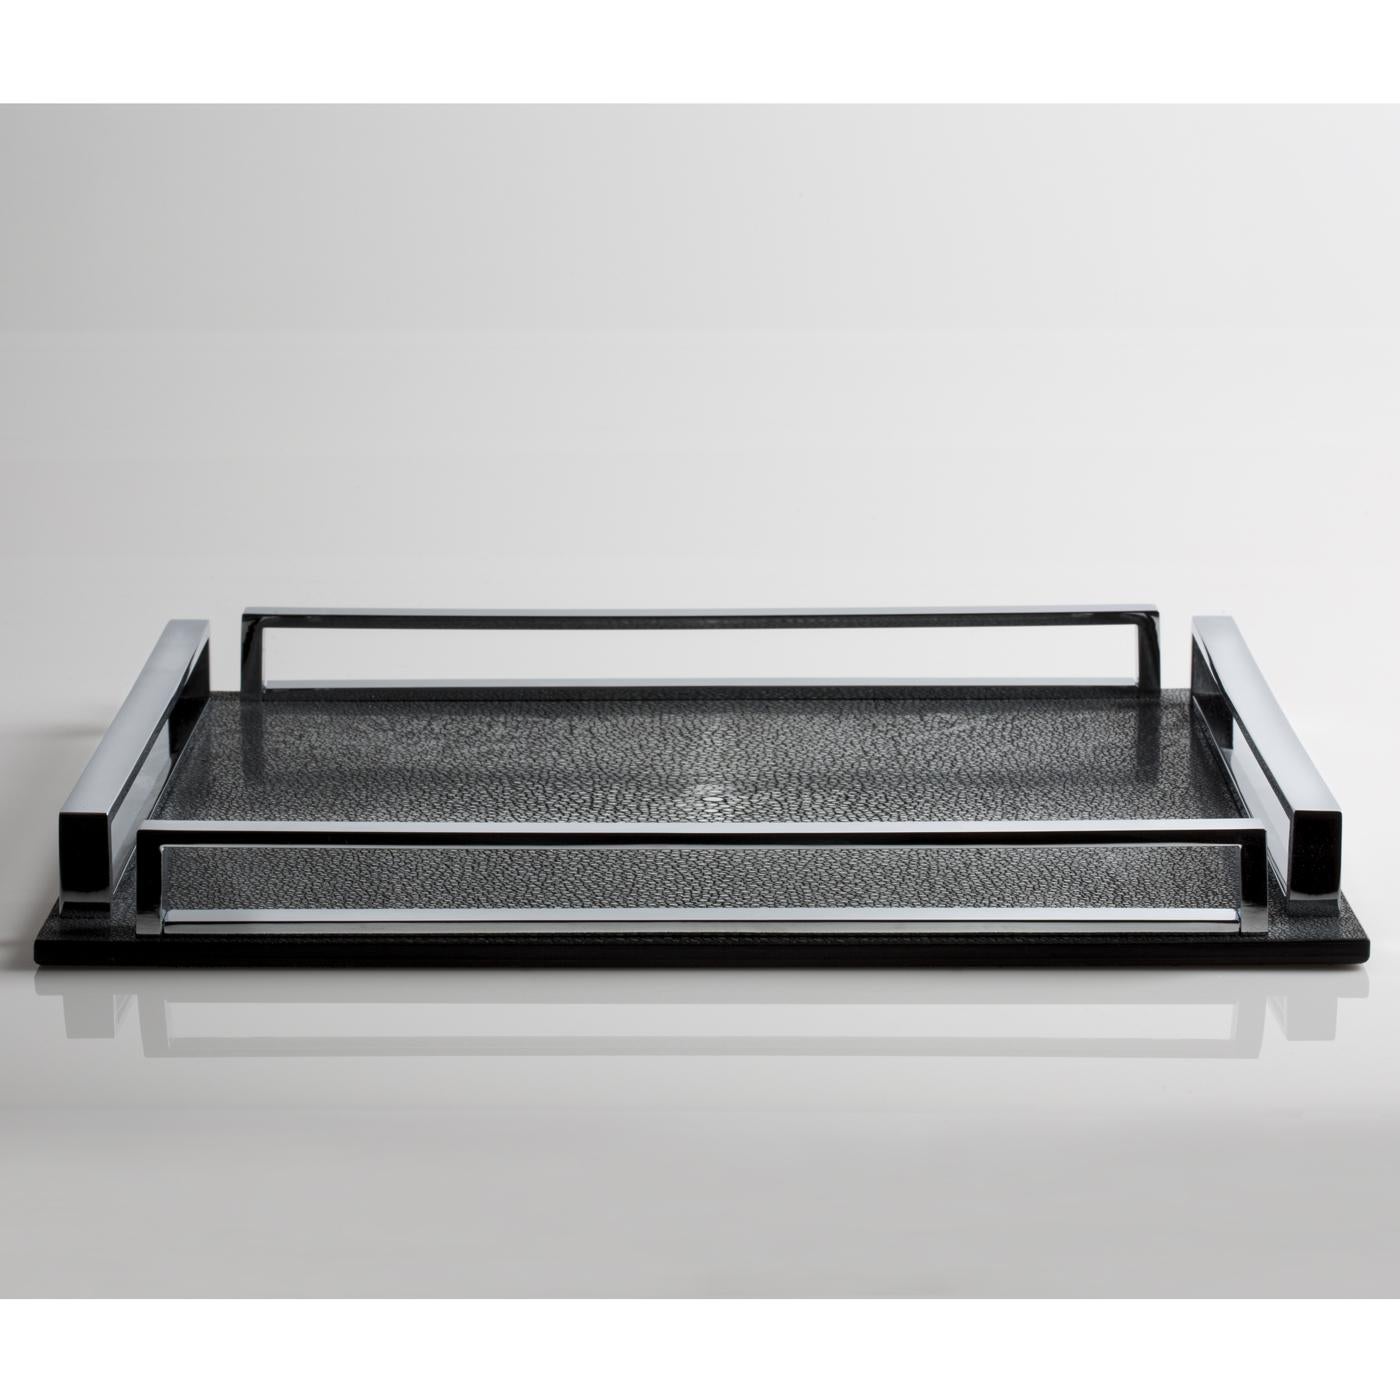 This superb tray will make a statement in any room. It can be used to style a modern entryway, or to serve small food in a living room. Its wooden base is upholstered in real shagreen leather dyed in mole brown, whose unique and luxurious texture